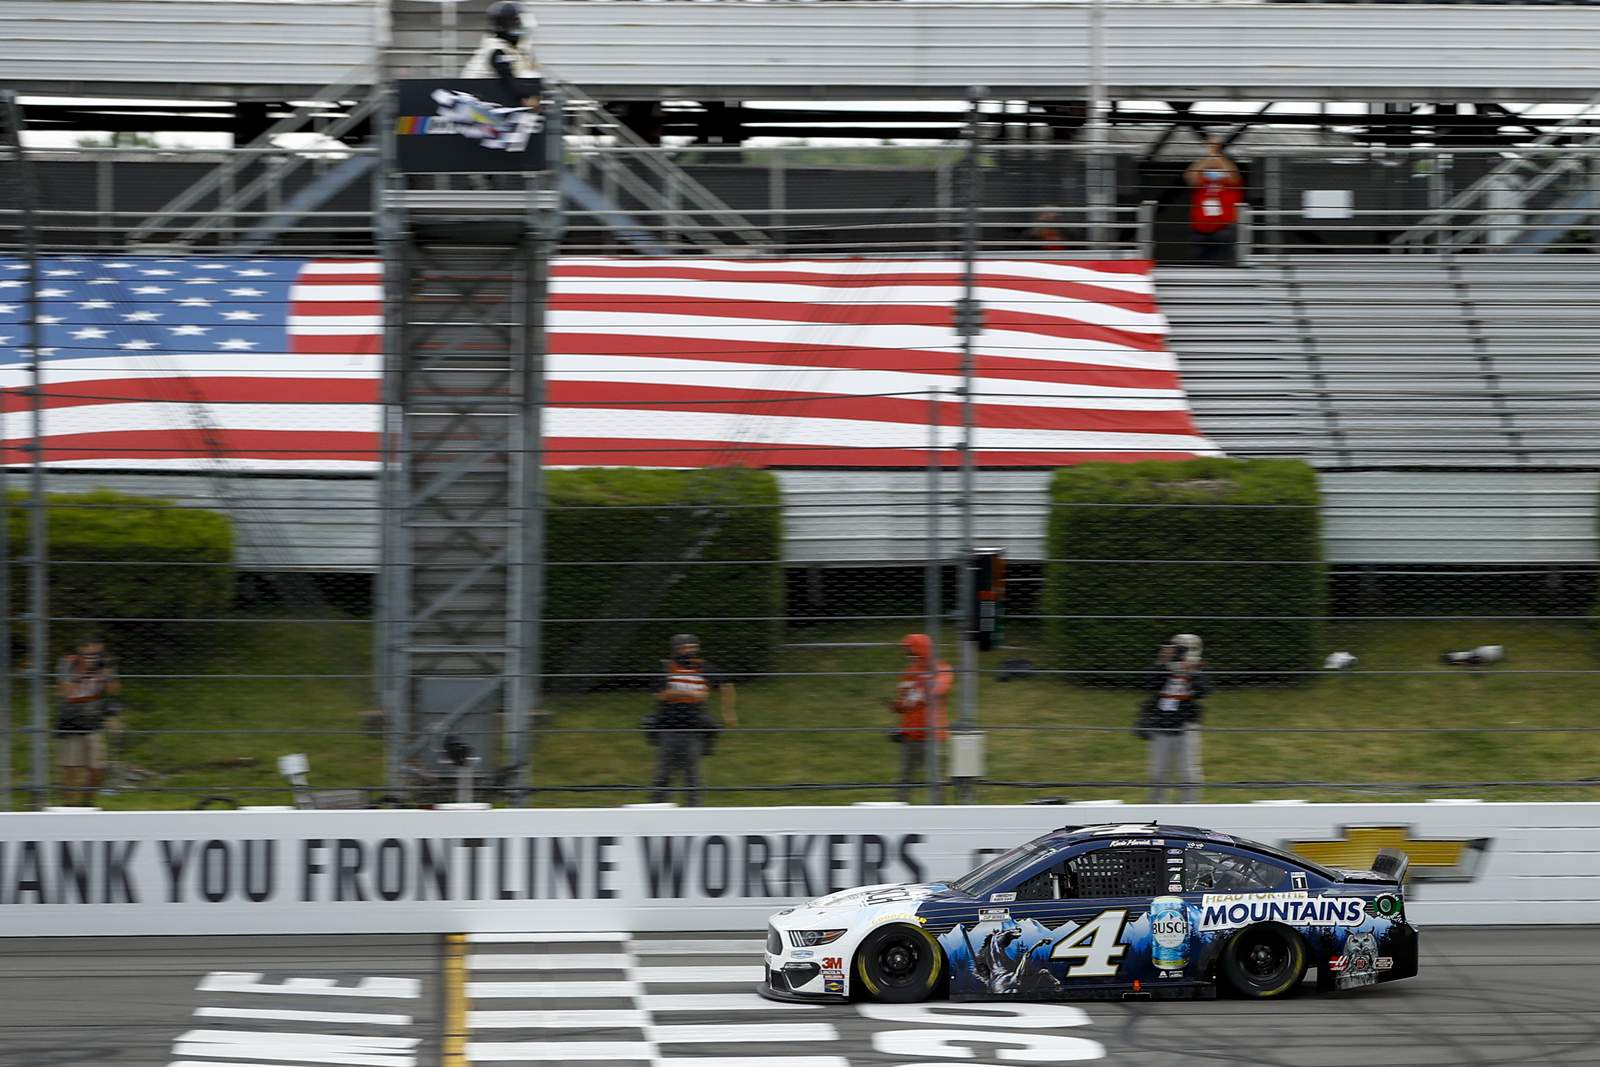 Late scratch: Harvick knocks off Pocono from winless list